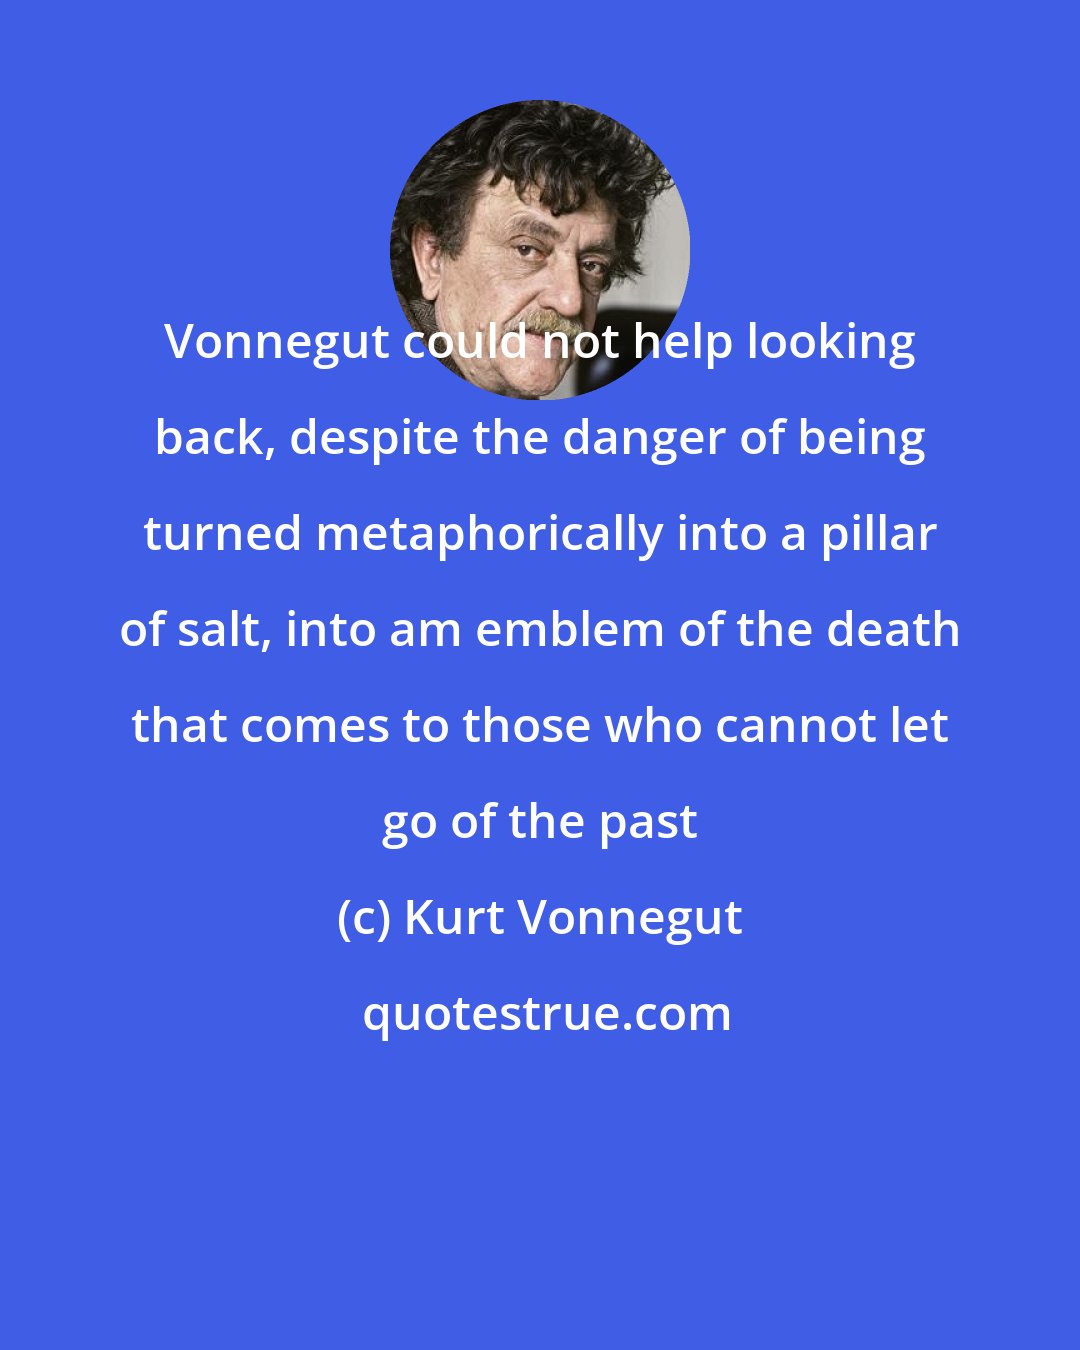 Kurt Vonnegut: Vonnegut could not help looking back, despite the danger of being turned metaphorically into a pillar of salt, into am emblem of the death that comes to those who cannot let go of the past